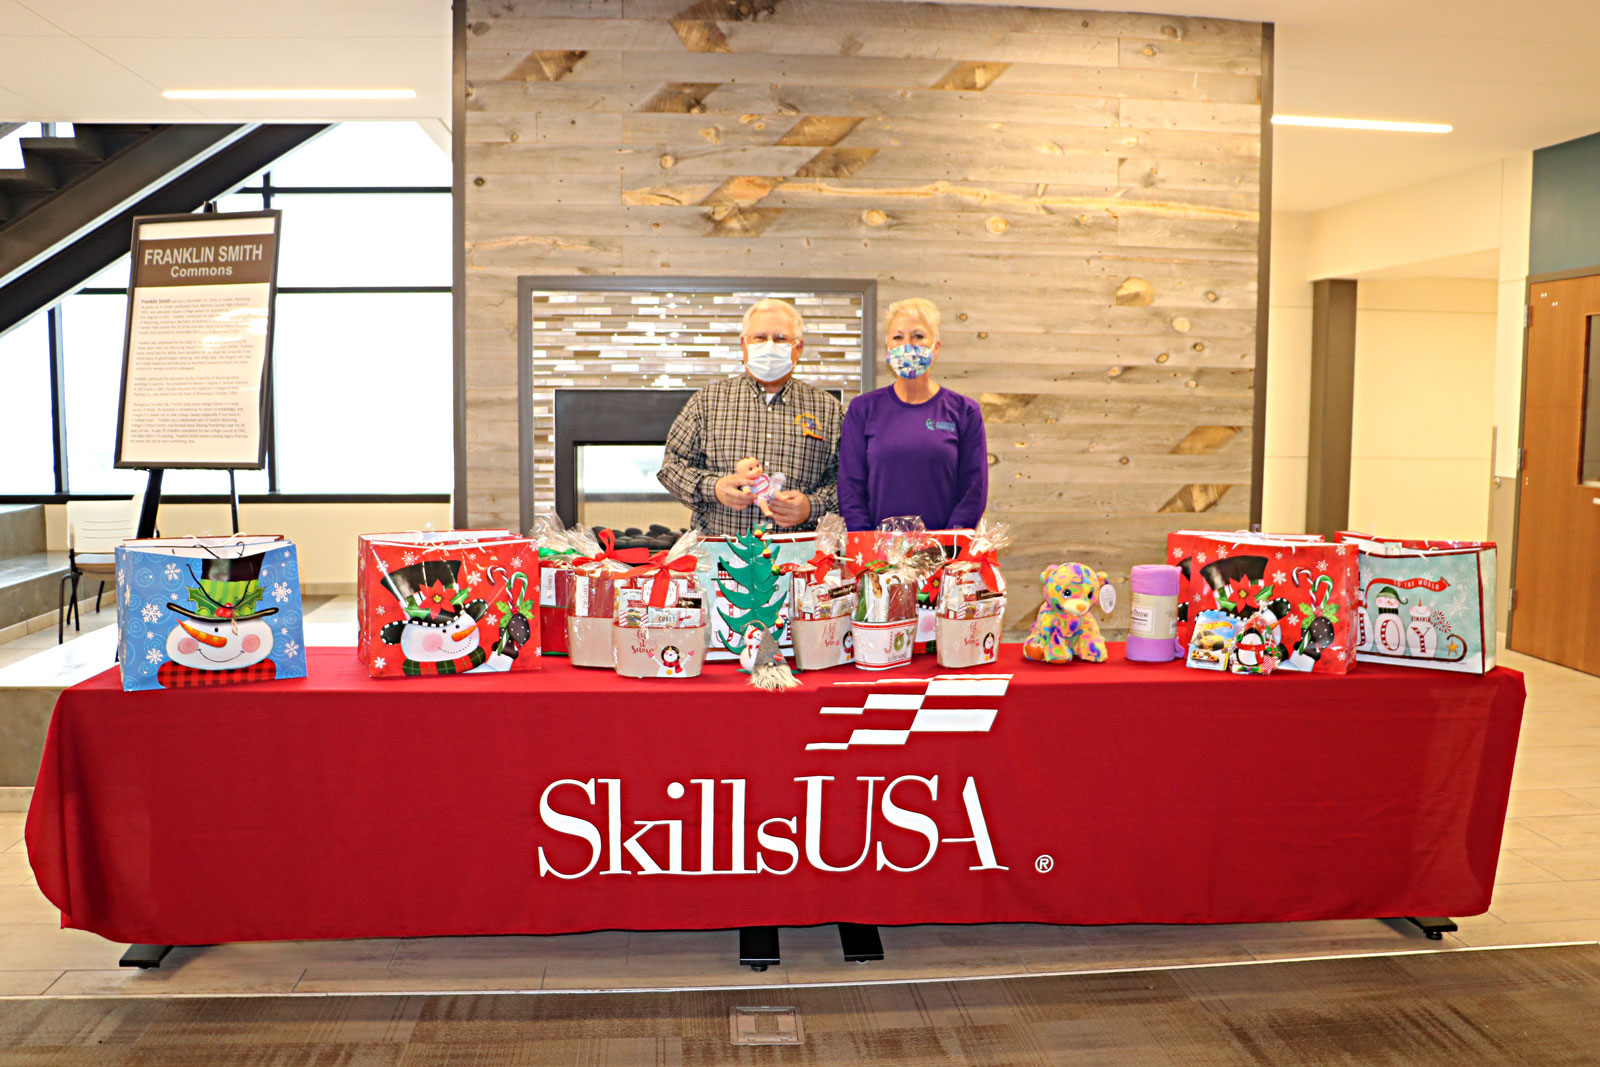 L-R Stan Nicolls, EWC SkillsUSA Sponsor and Aleata Sittner, TLC, with the gifts that were given to TLC from the EWC SkillsUSA members.